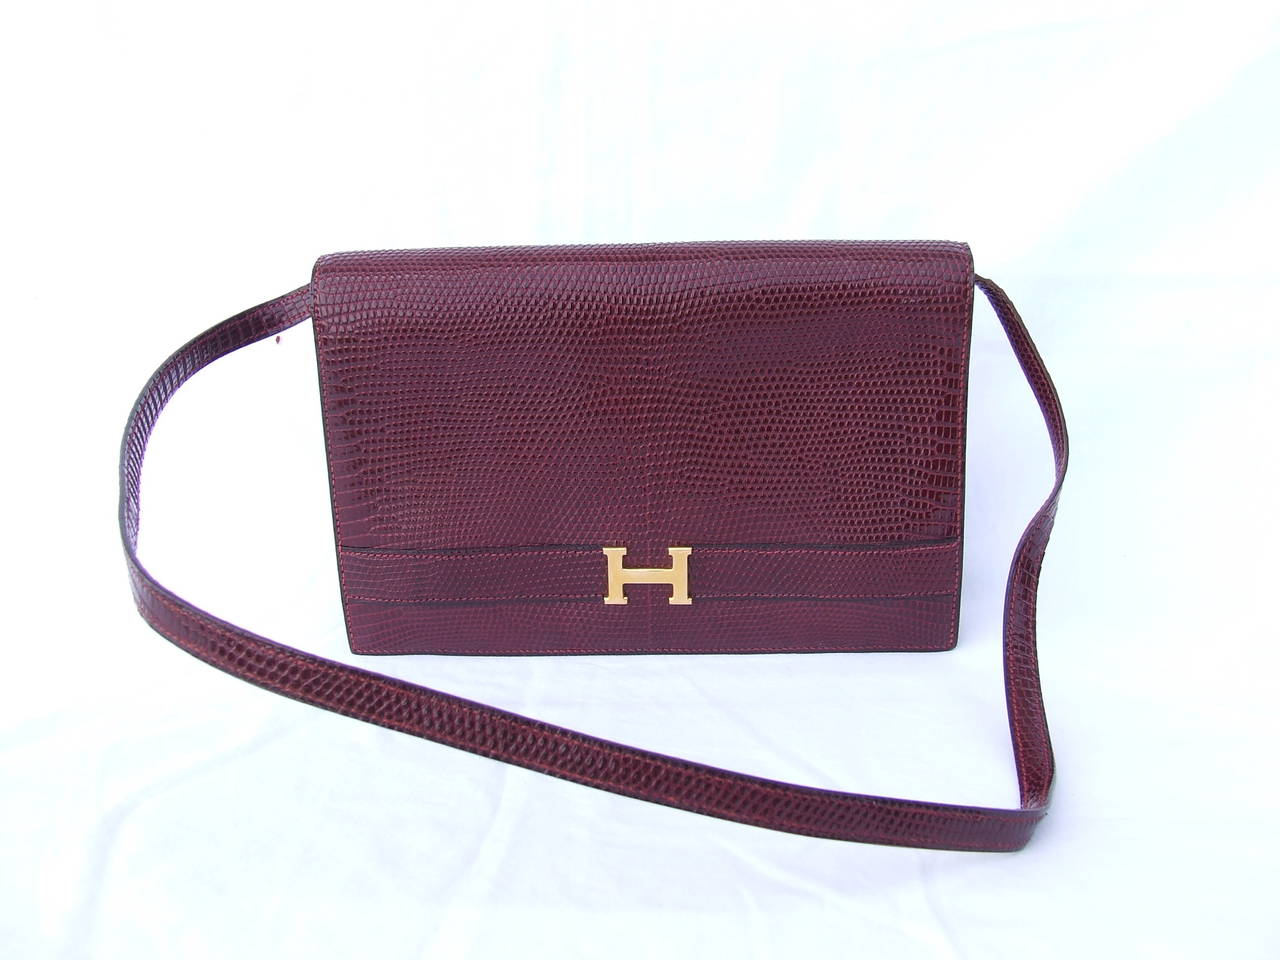 Currently at the Hermes SPA. Avalaible for sale soon.

RARE AND BEAUTIFUL AUTHENTIC HERMES BAG

